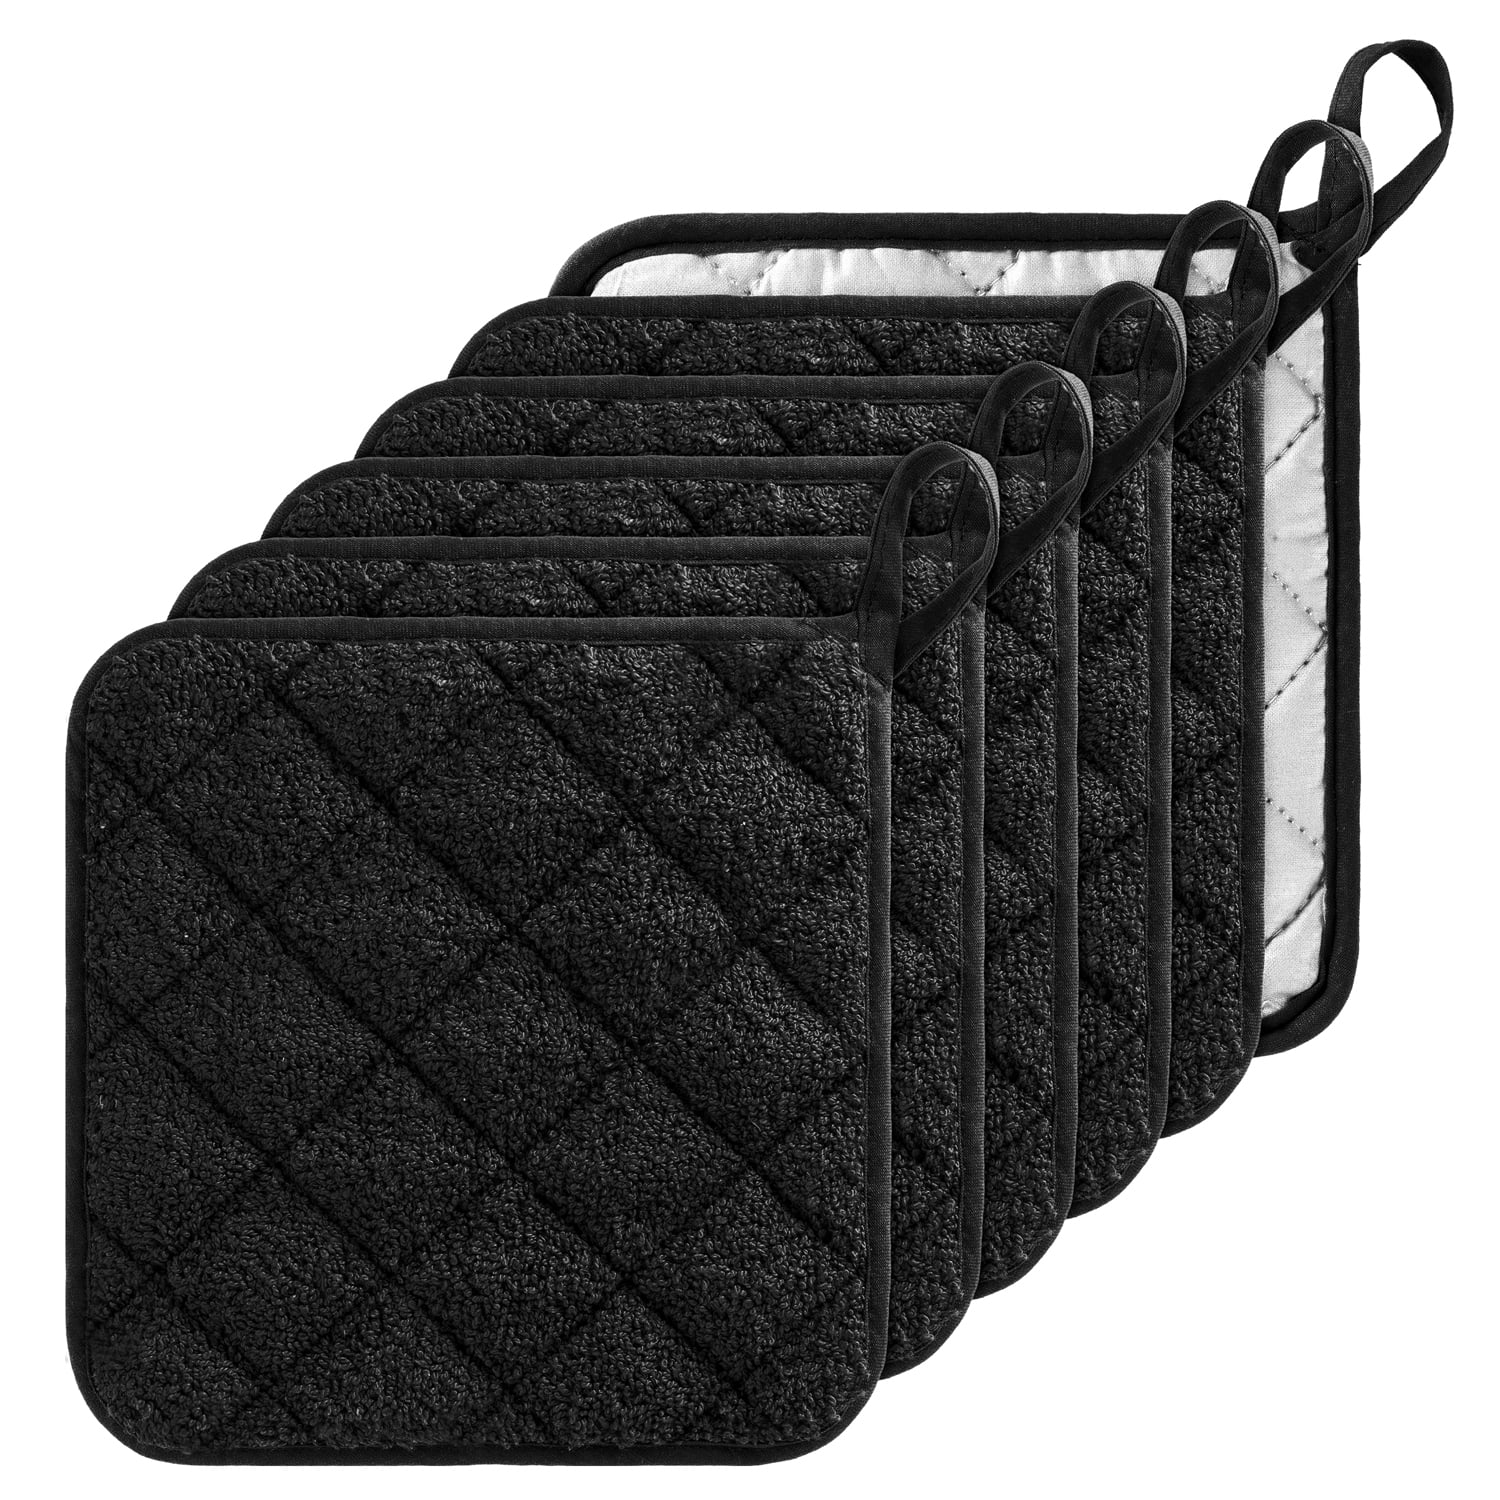 Joyhalo 4 Pack Pot Holders for Kitchen Heat Resistant Clearance Pot Holders  Sets Oven Hot Pads Terry Cloth Pot Holders for Cooking Baking, Black